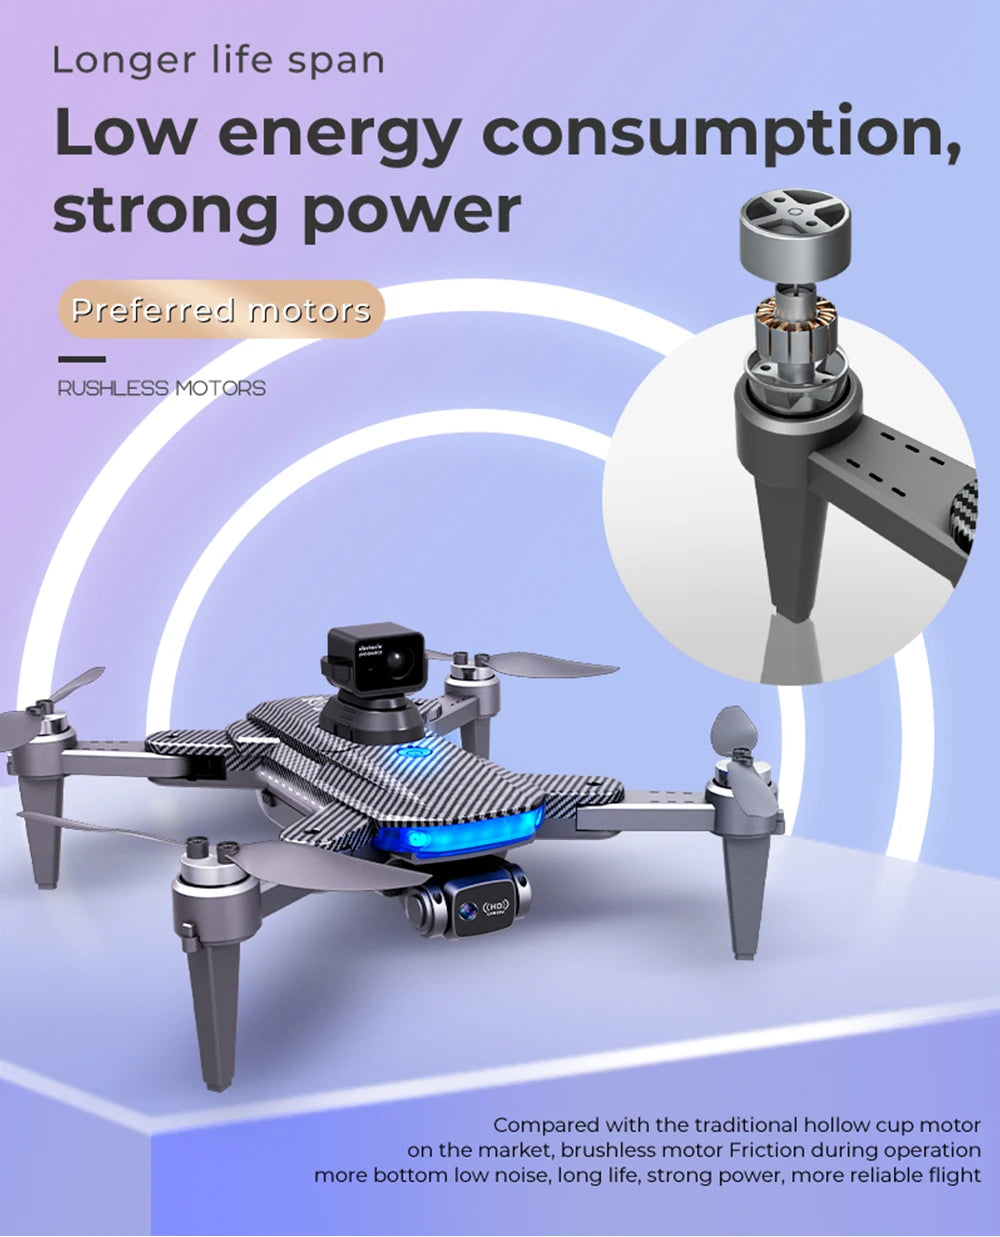 HJ90 PRO GPS Drone, compared with the traditional hollow cup motor on the market; brushless motor Friction during operation